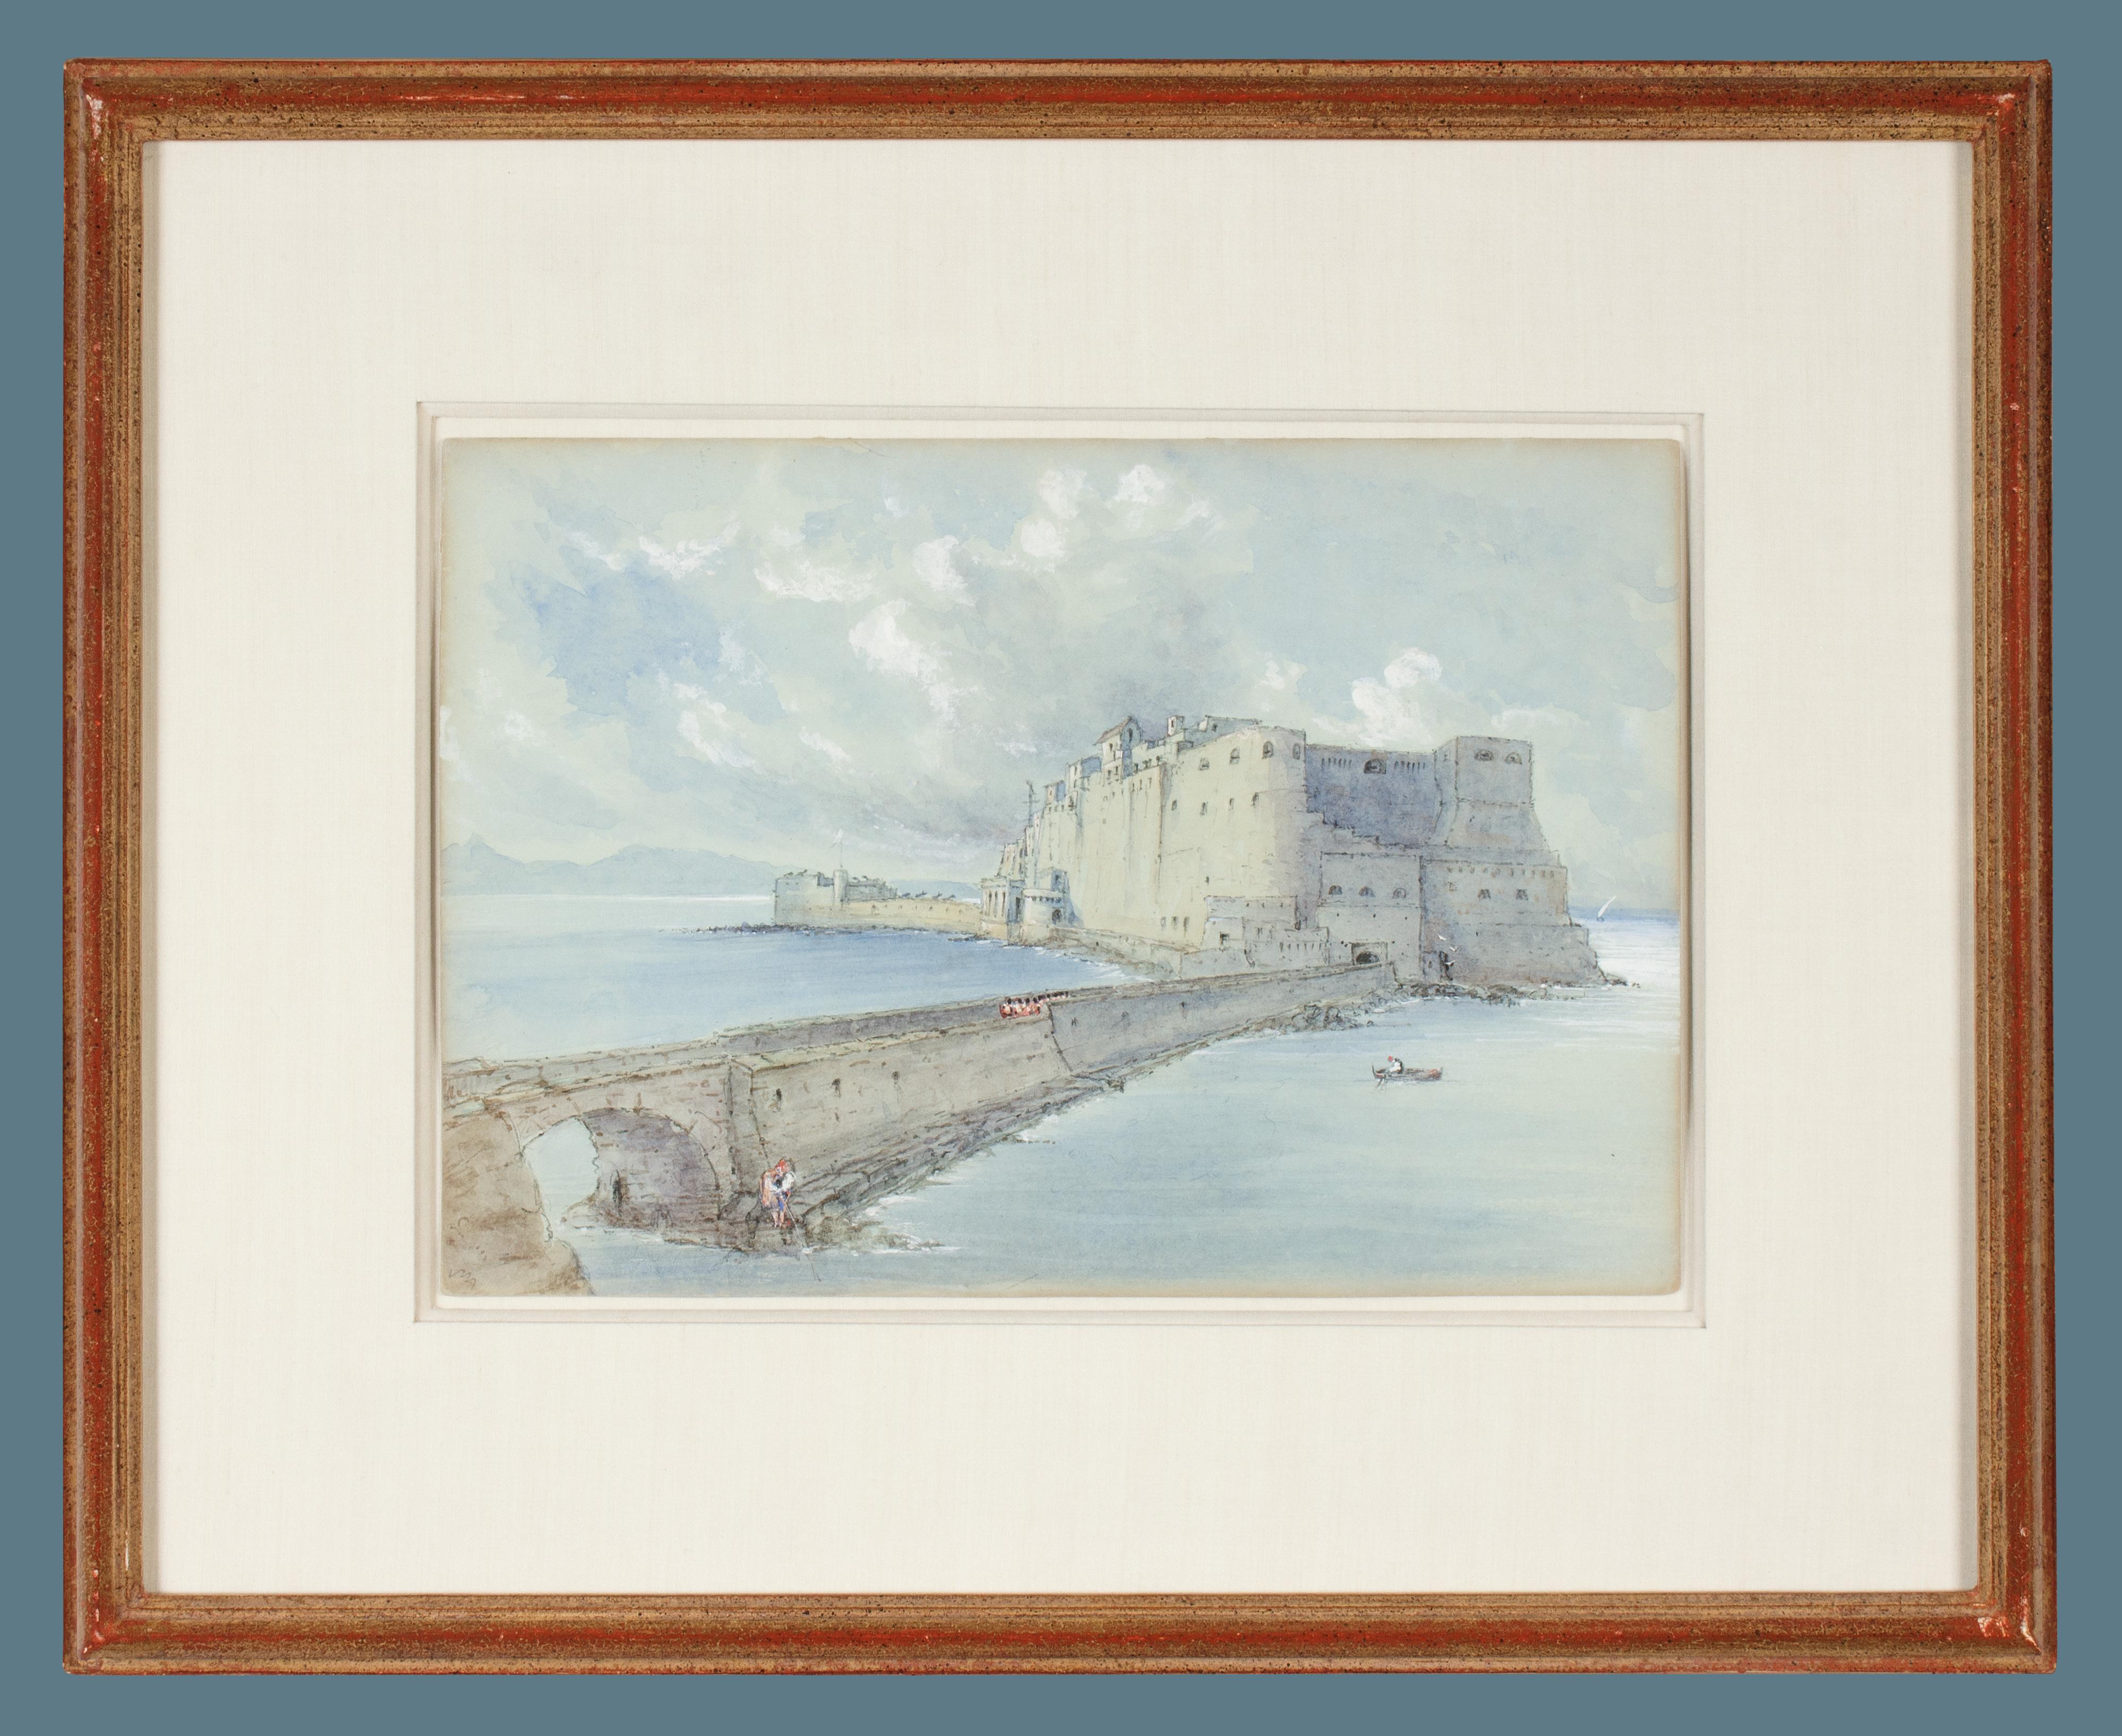 Edward Howman Landscape Art - Watercolor featuring Castel dell'Ovo, Naples, 1851 by English Artist Howman